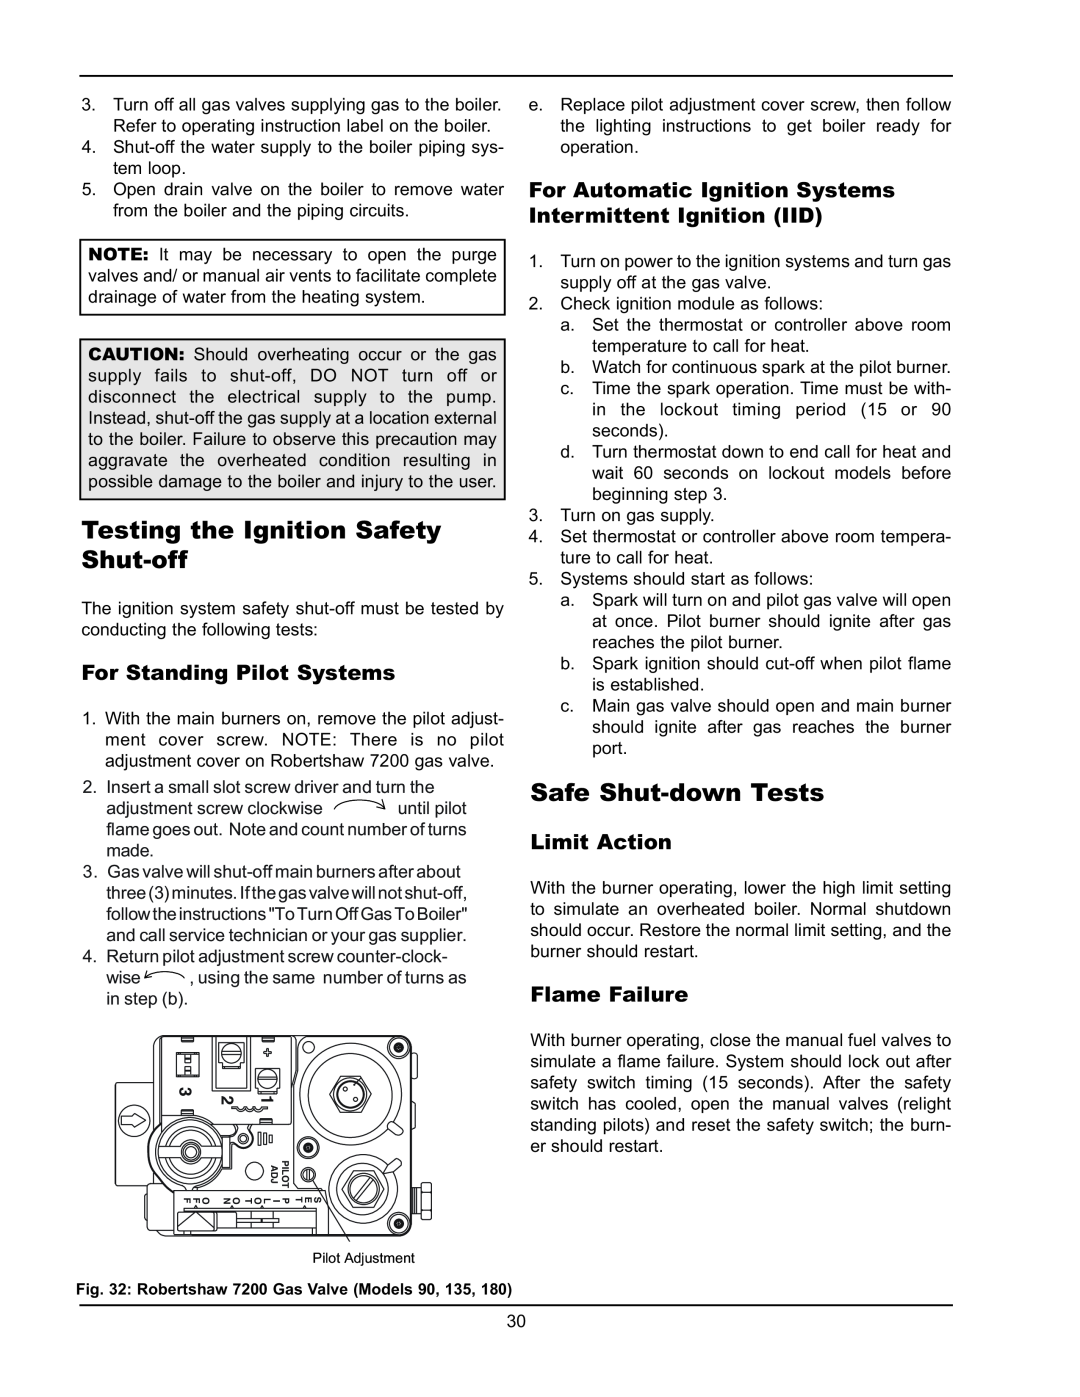 Raypak 0066B, 0180B Testing the Ignition Safety Shut-off, Safe Shut-downTests, For Standing Pilot Systems, Limit Action 